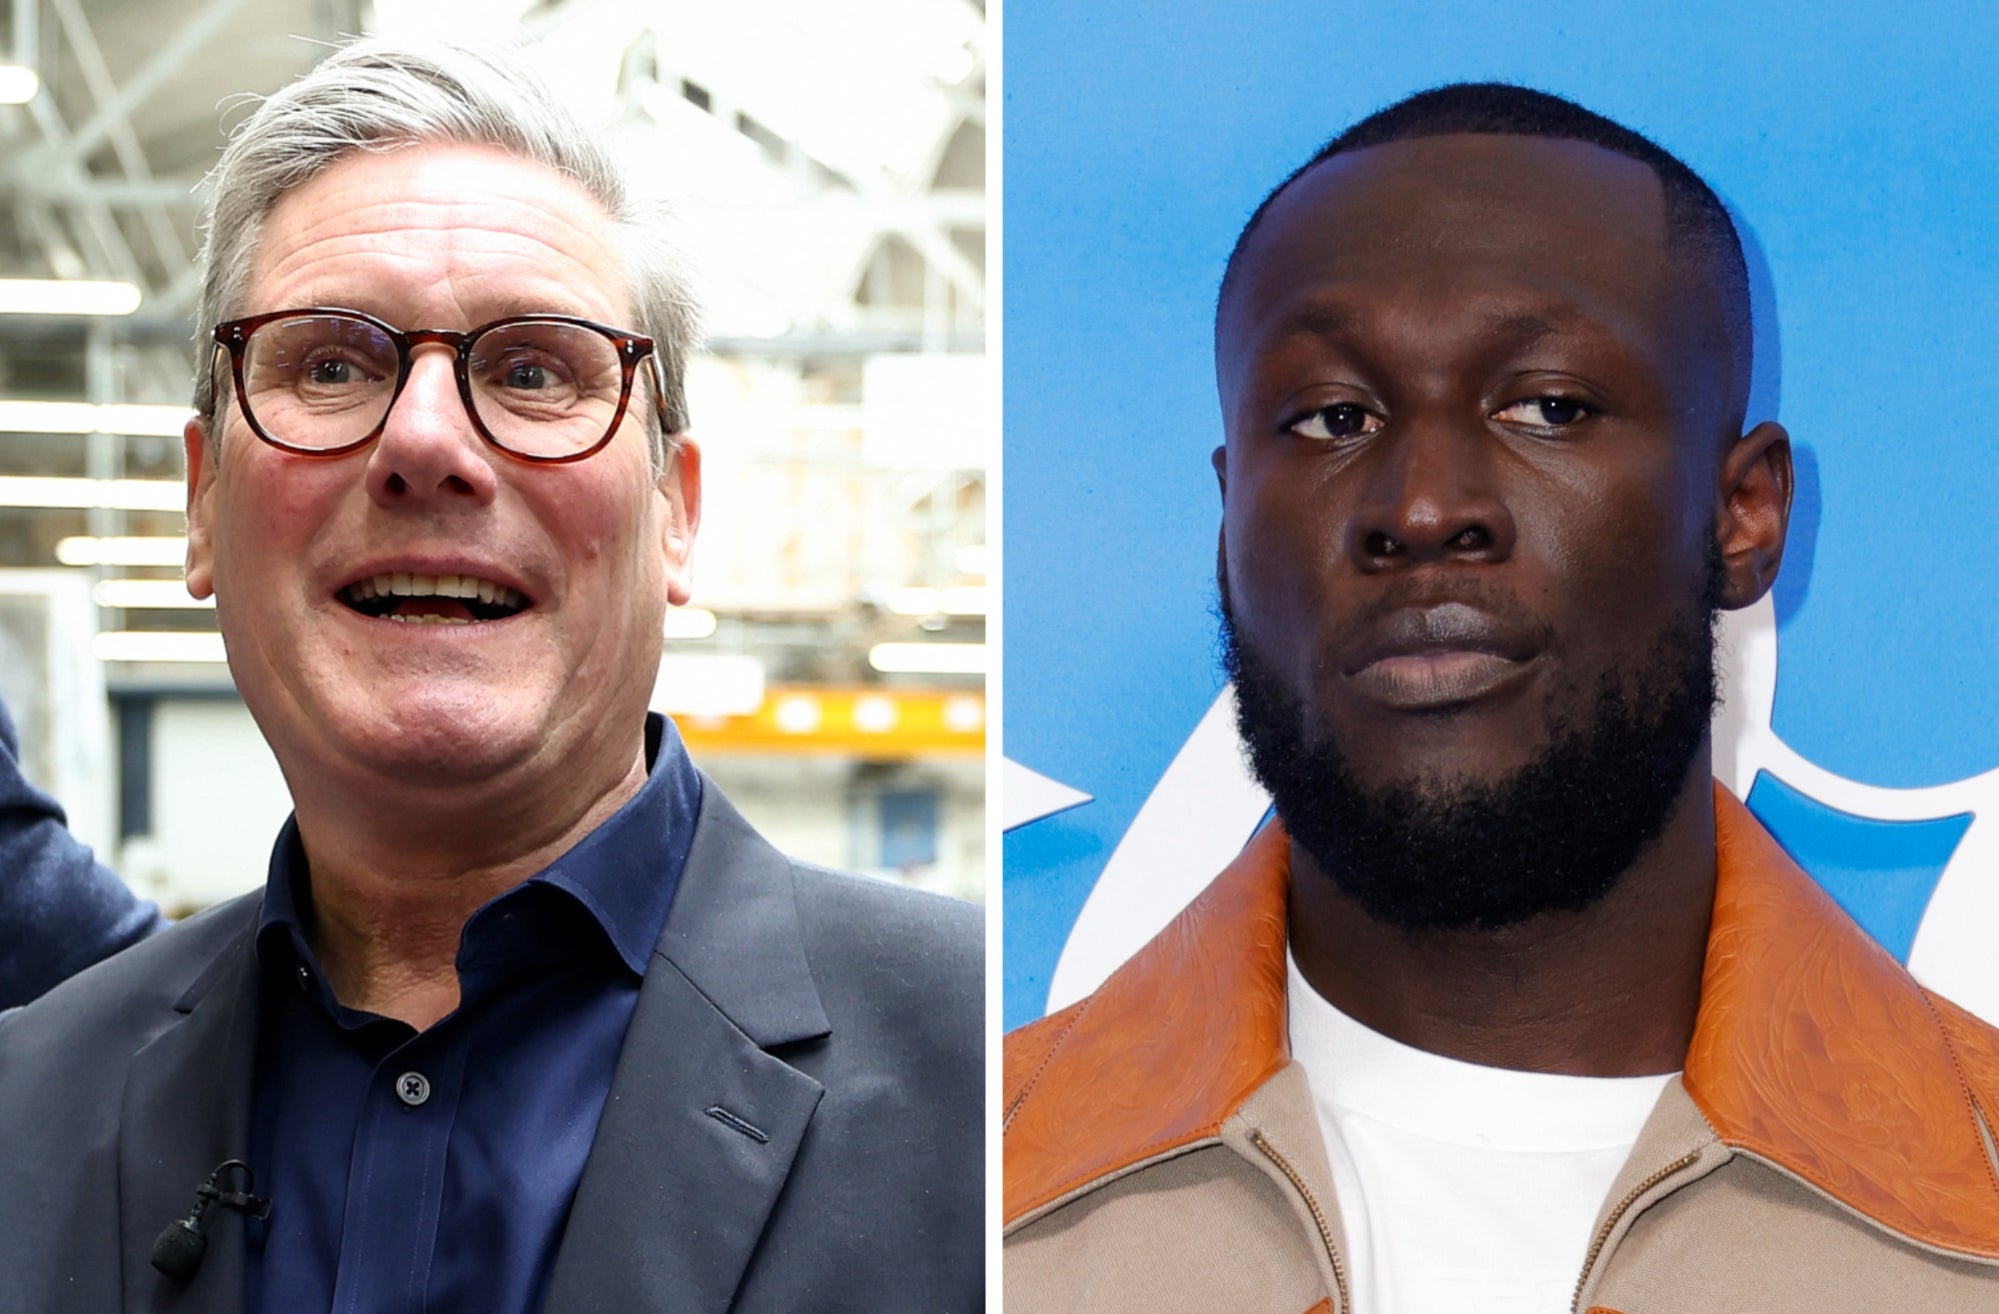 Stormzy has been vocal about his political beliefs